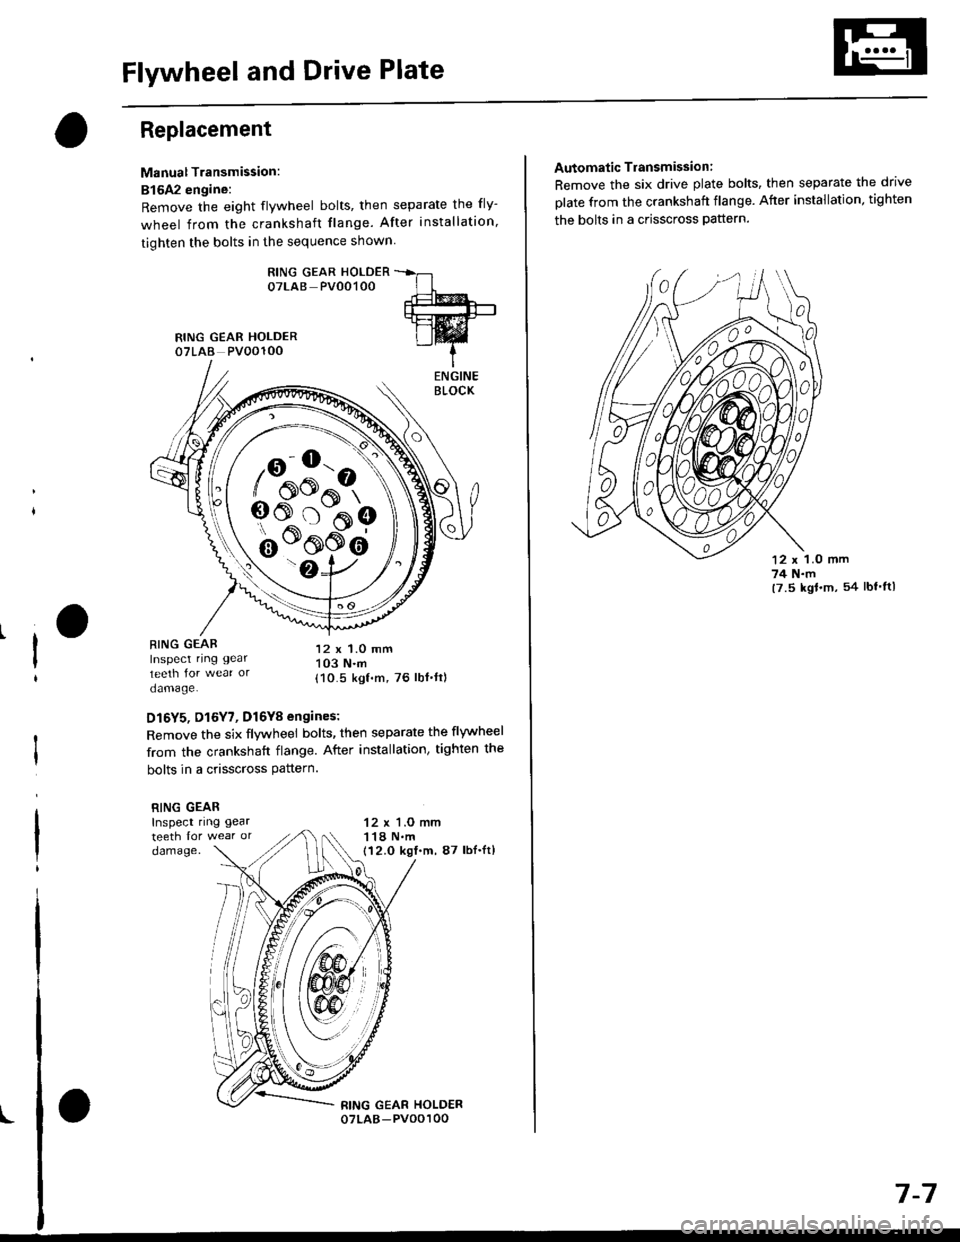 HONDA CIVIC 1997 6.G Workshop Manual Flywheel and Drive Plate
Replacement
Manual Transmission:
816A2 engine:
Remove the eight flywheel bolts, then separate the fly-
wheel from the crankshaft flange. After installation
tiohten the bolts 